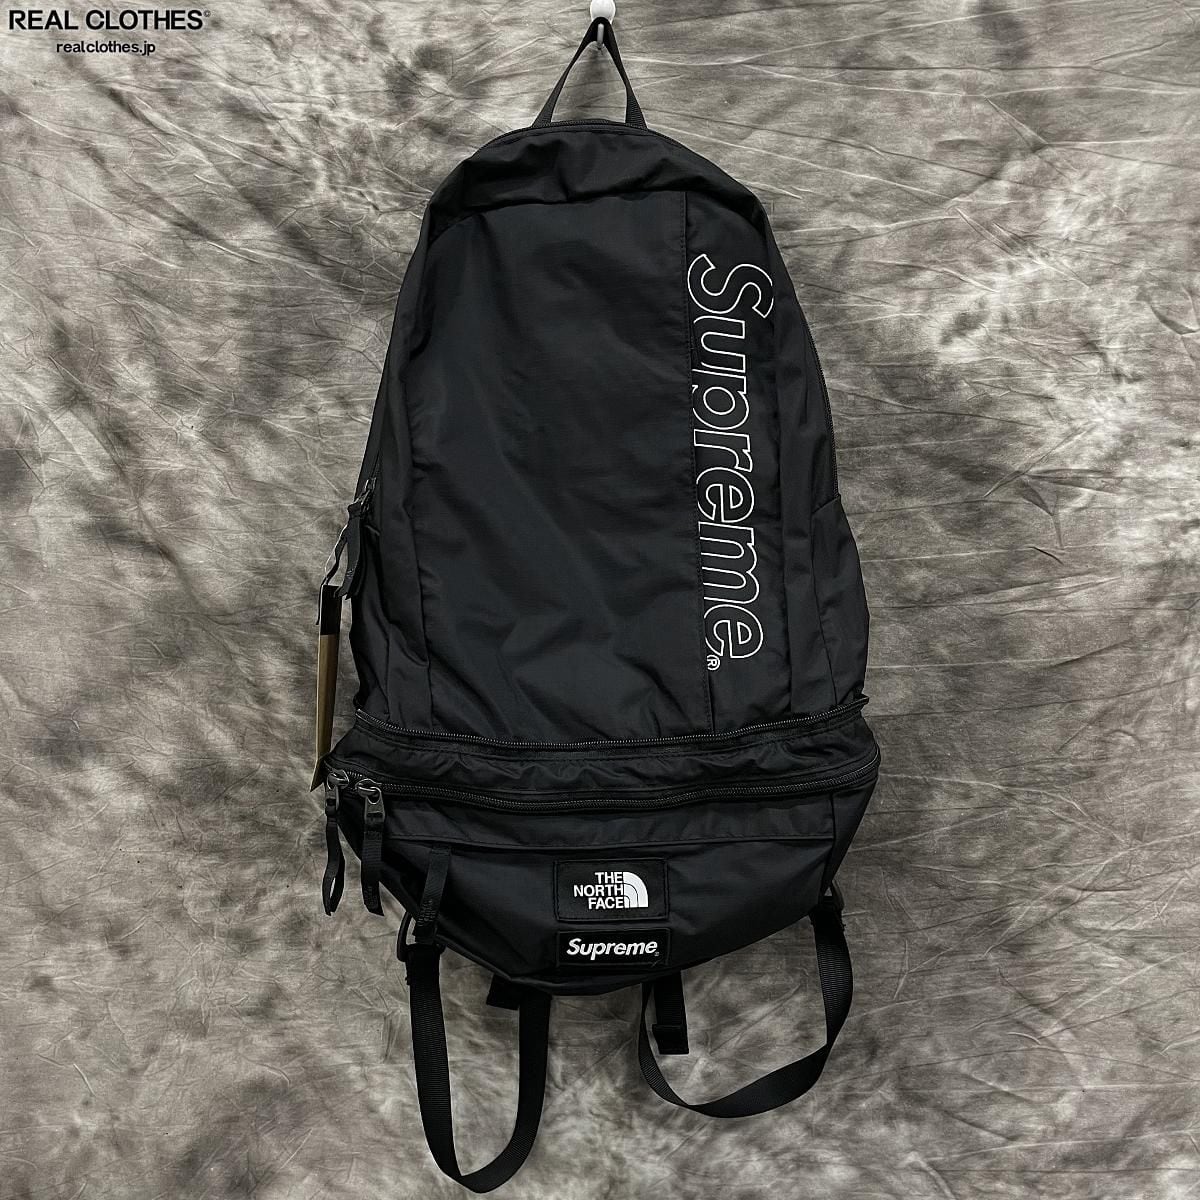 Supreme×THE NORTH FACE/シュプリーム×ノースフェイス【22SS】Convertible Backpack/コンバーチル  バックパック NM72210I REALCLOTHES/リアルクローズ